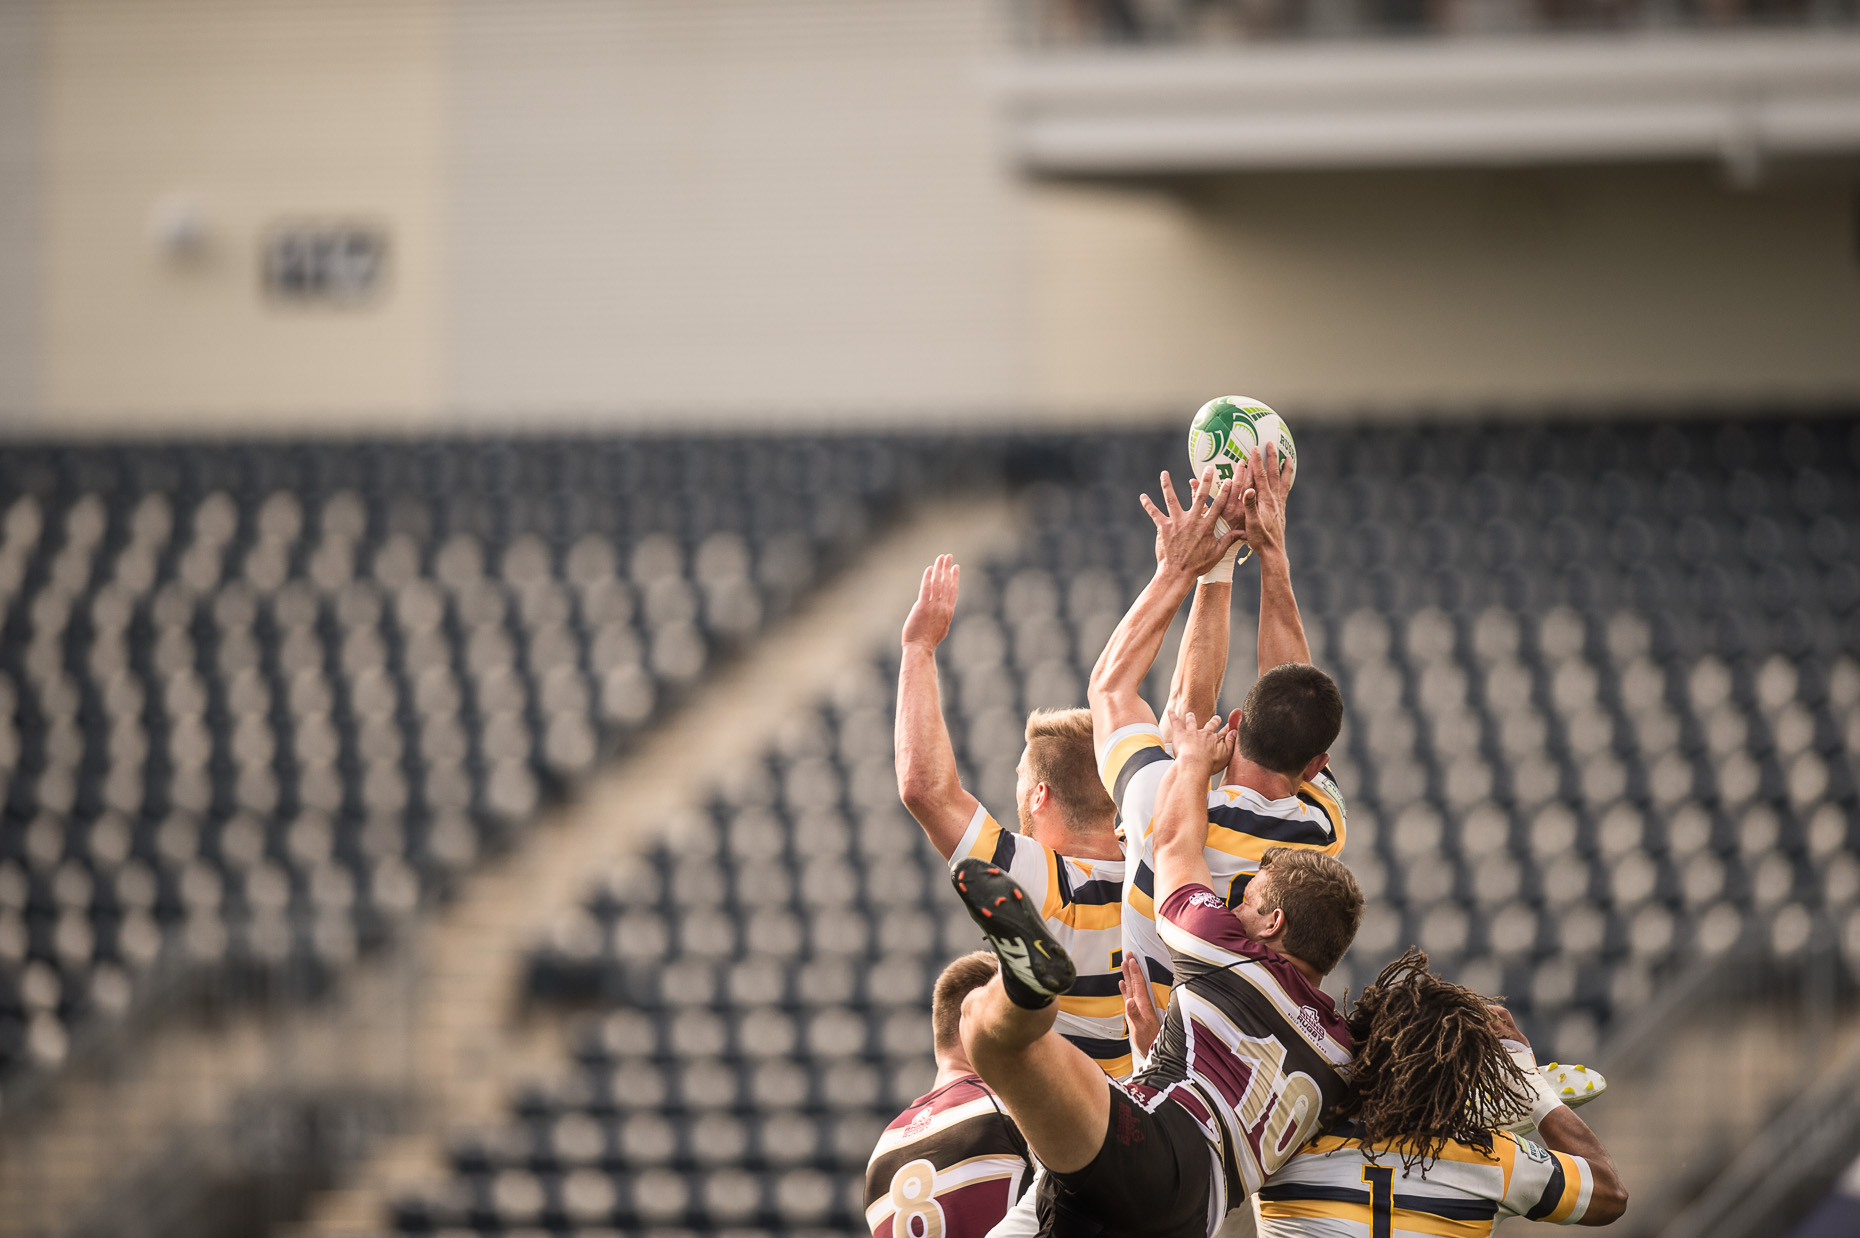 Rugby Catch | Penn Mutual | Commercial Philadelphia 